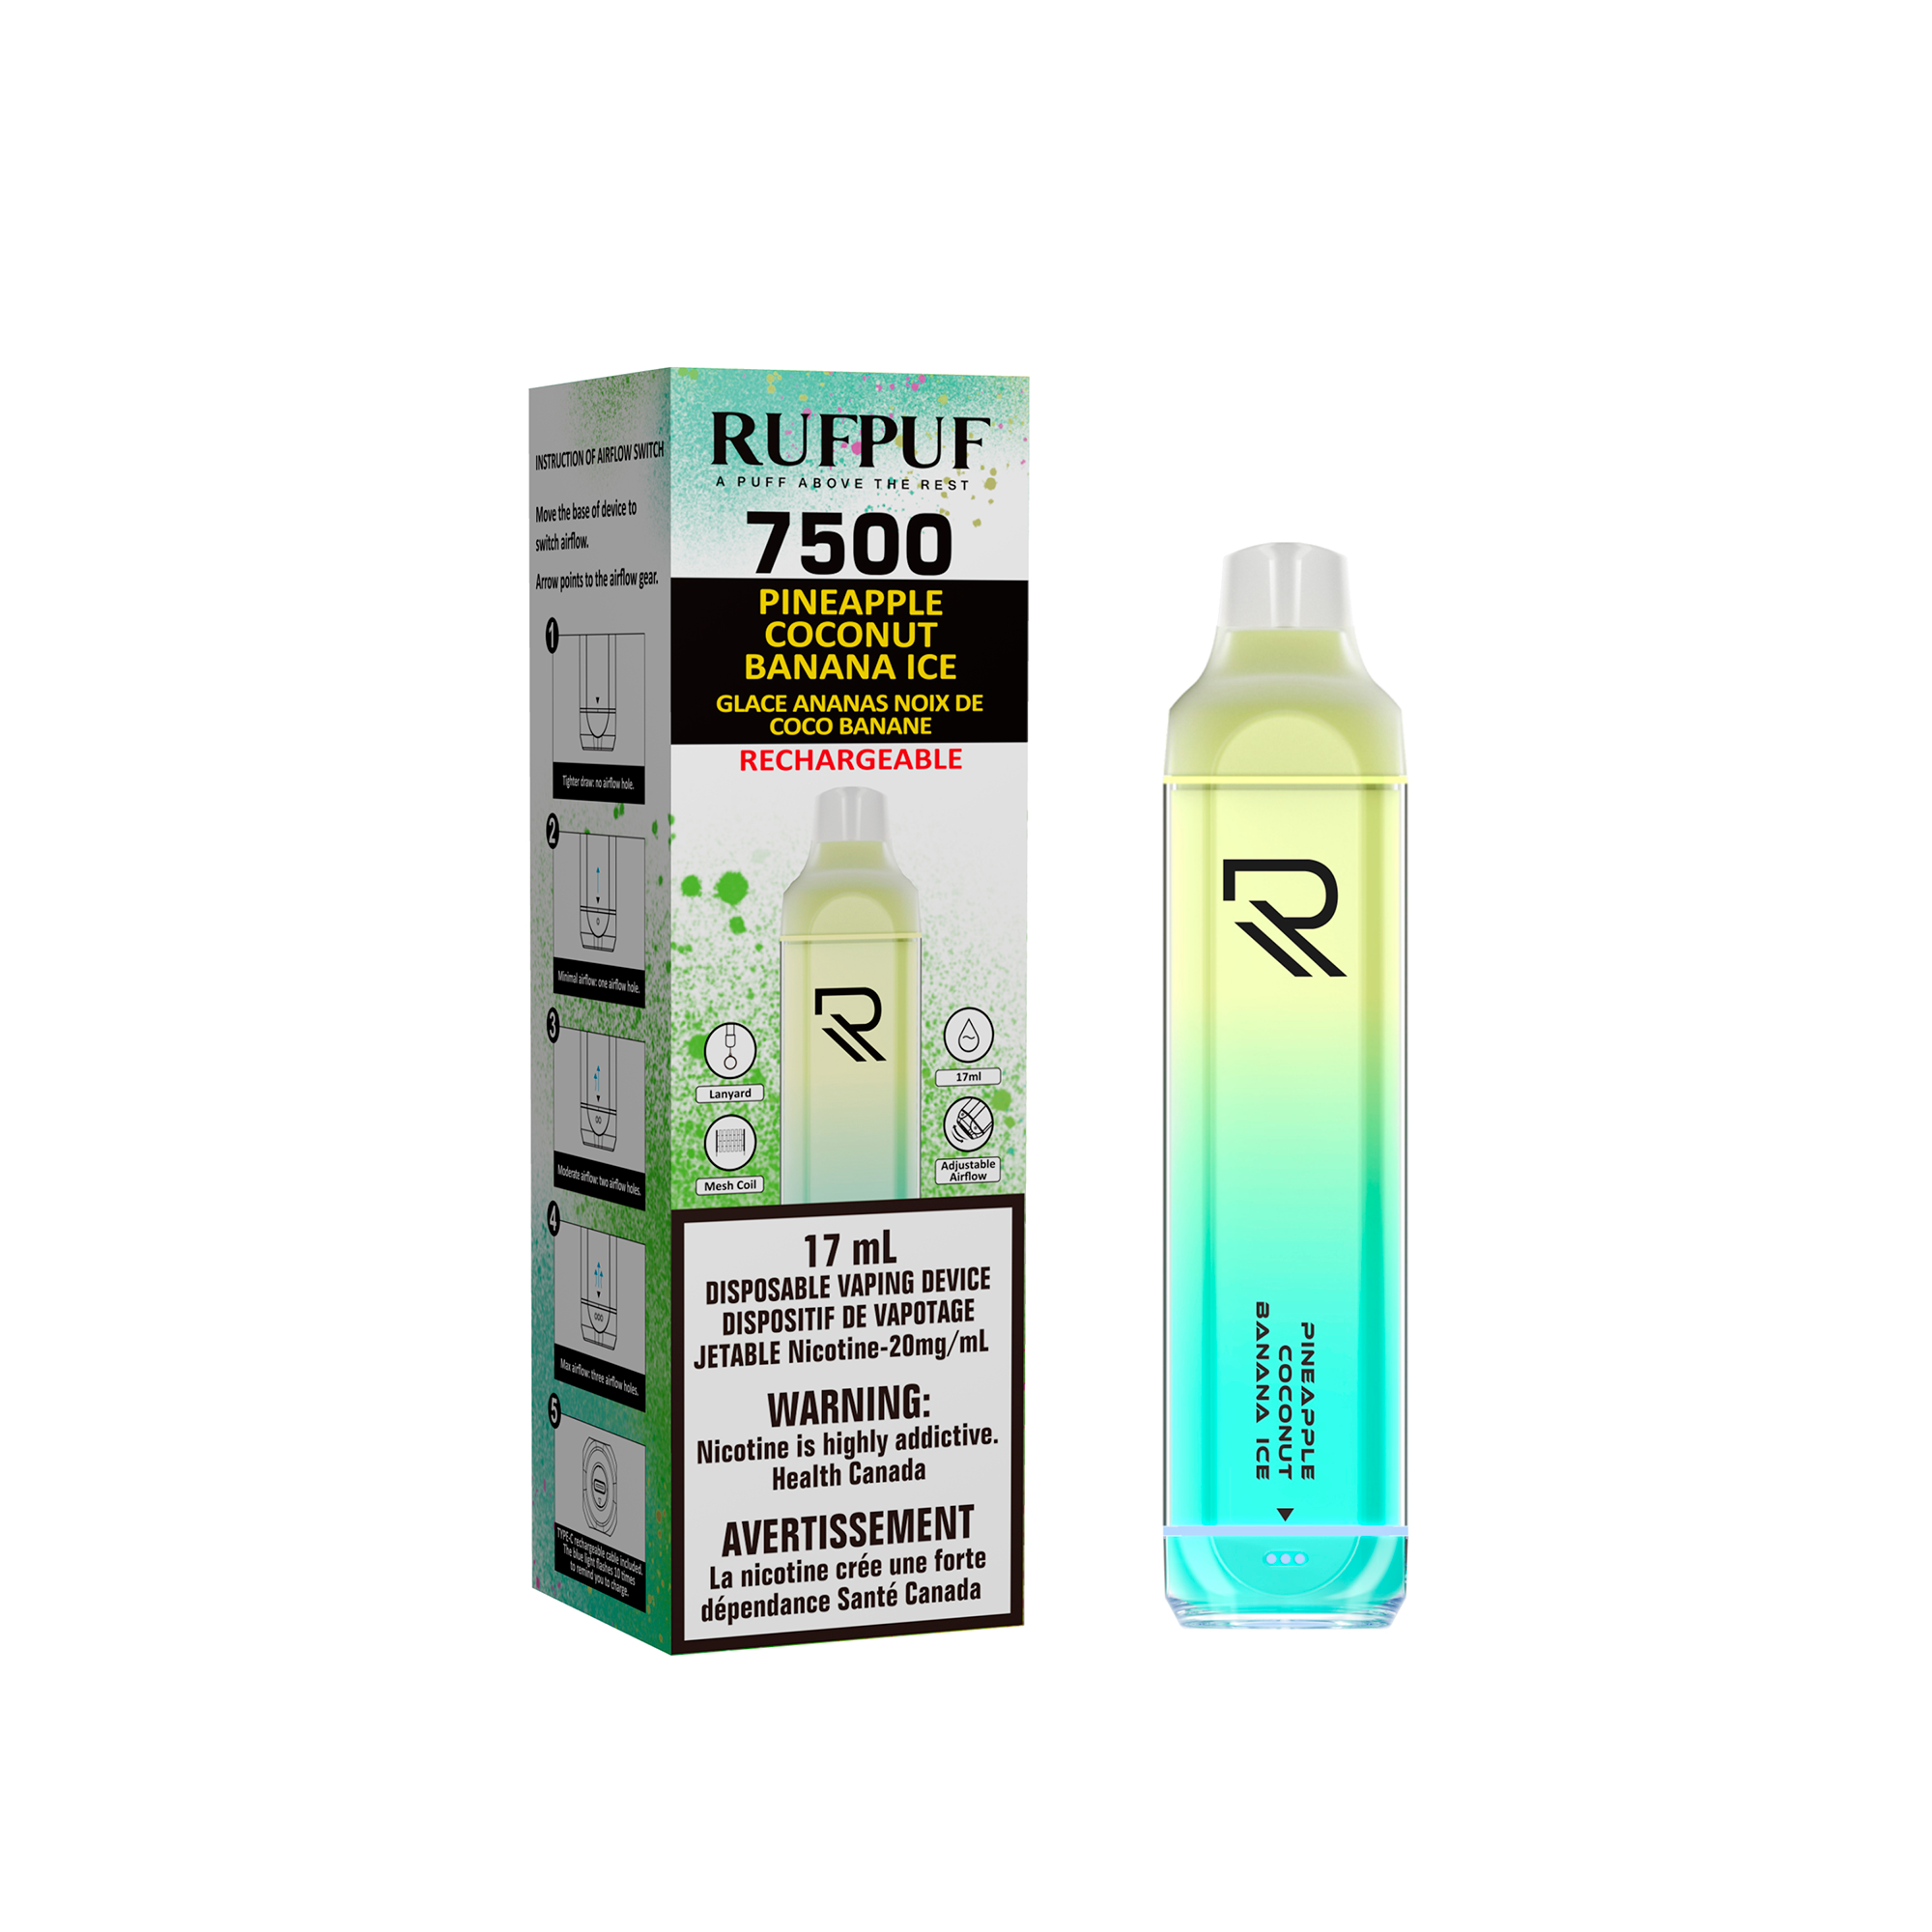 Gcore RufPuf 7500 Puffs Disposable Vape (10PCs) - Excise Version-undefined | For sale Jubilee Distributors